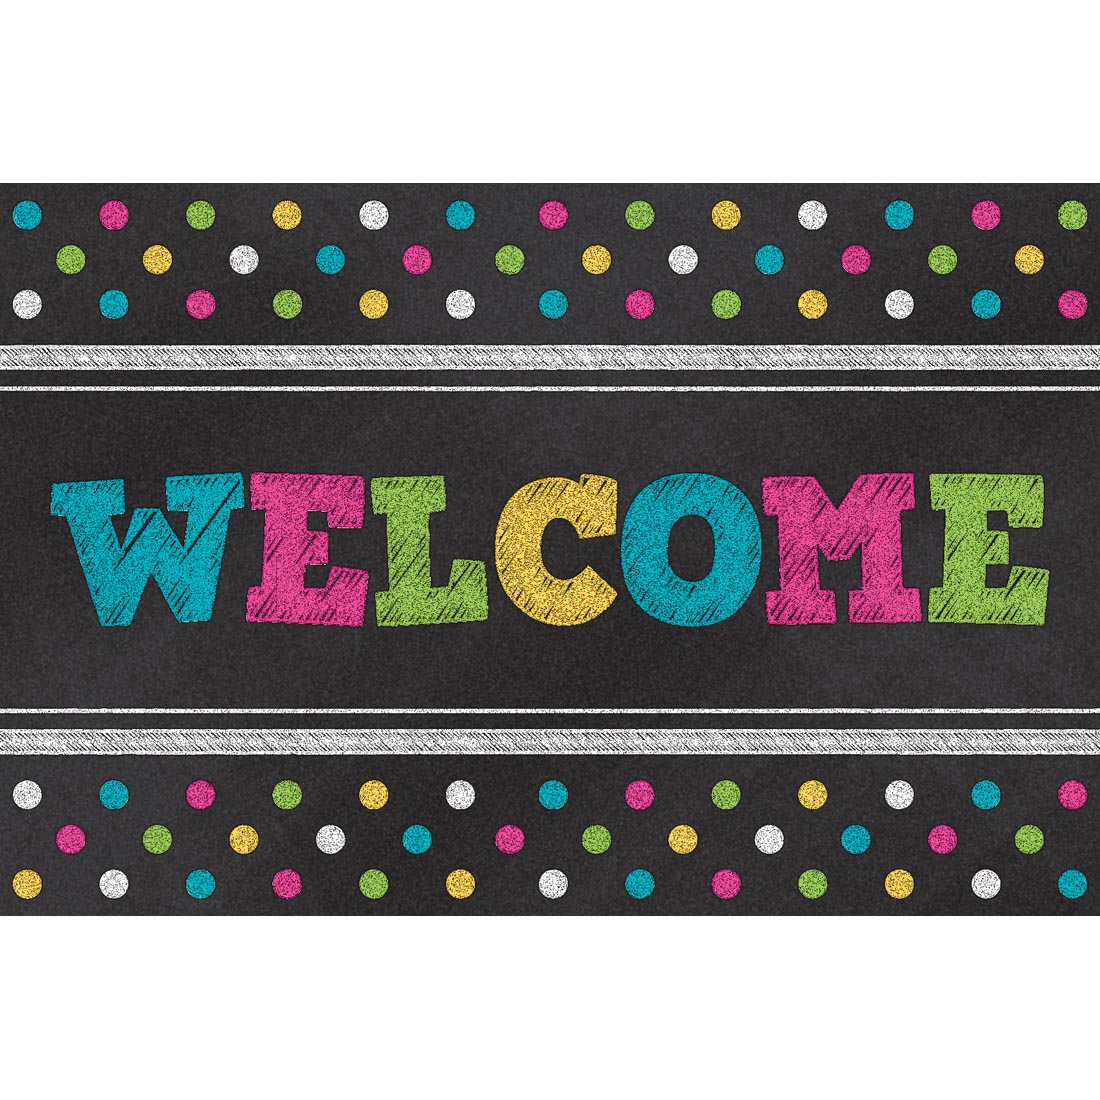 Welcome Postcard from the Chalkboard Brights collection by Teacher Created Resources